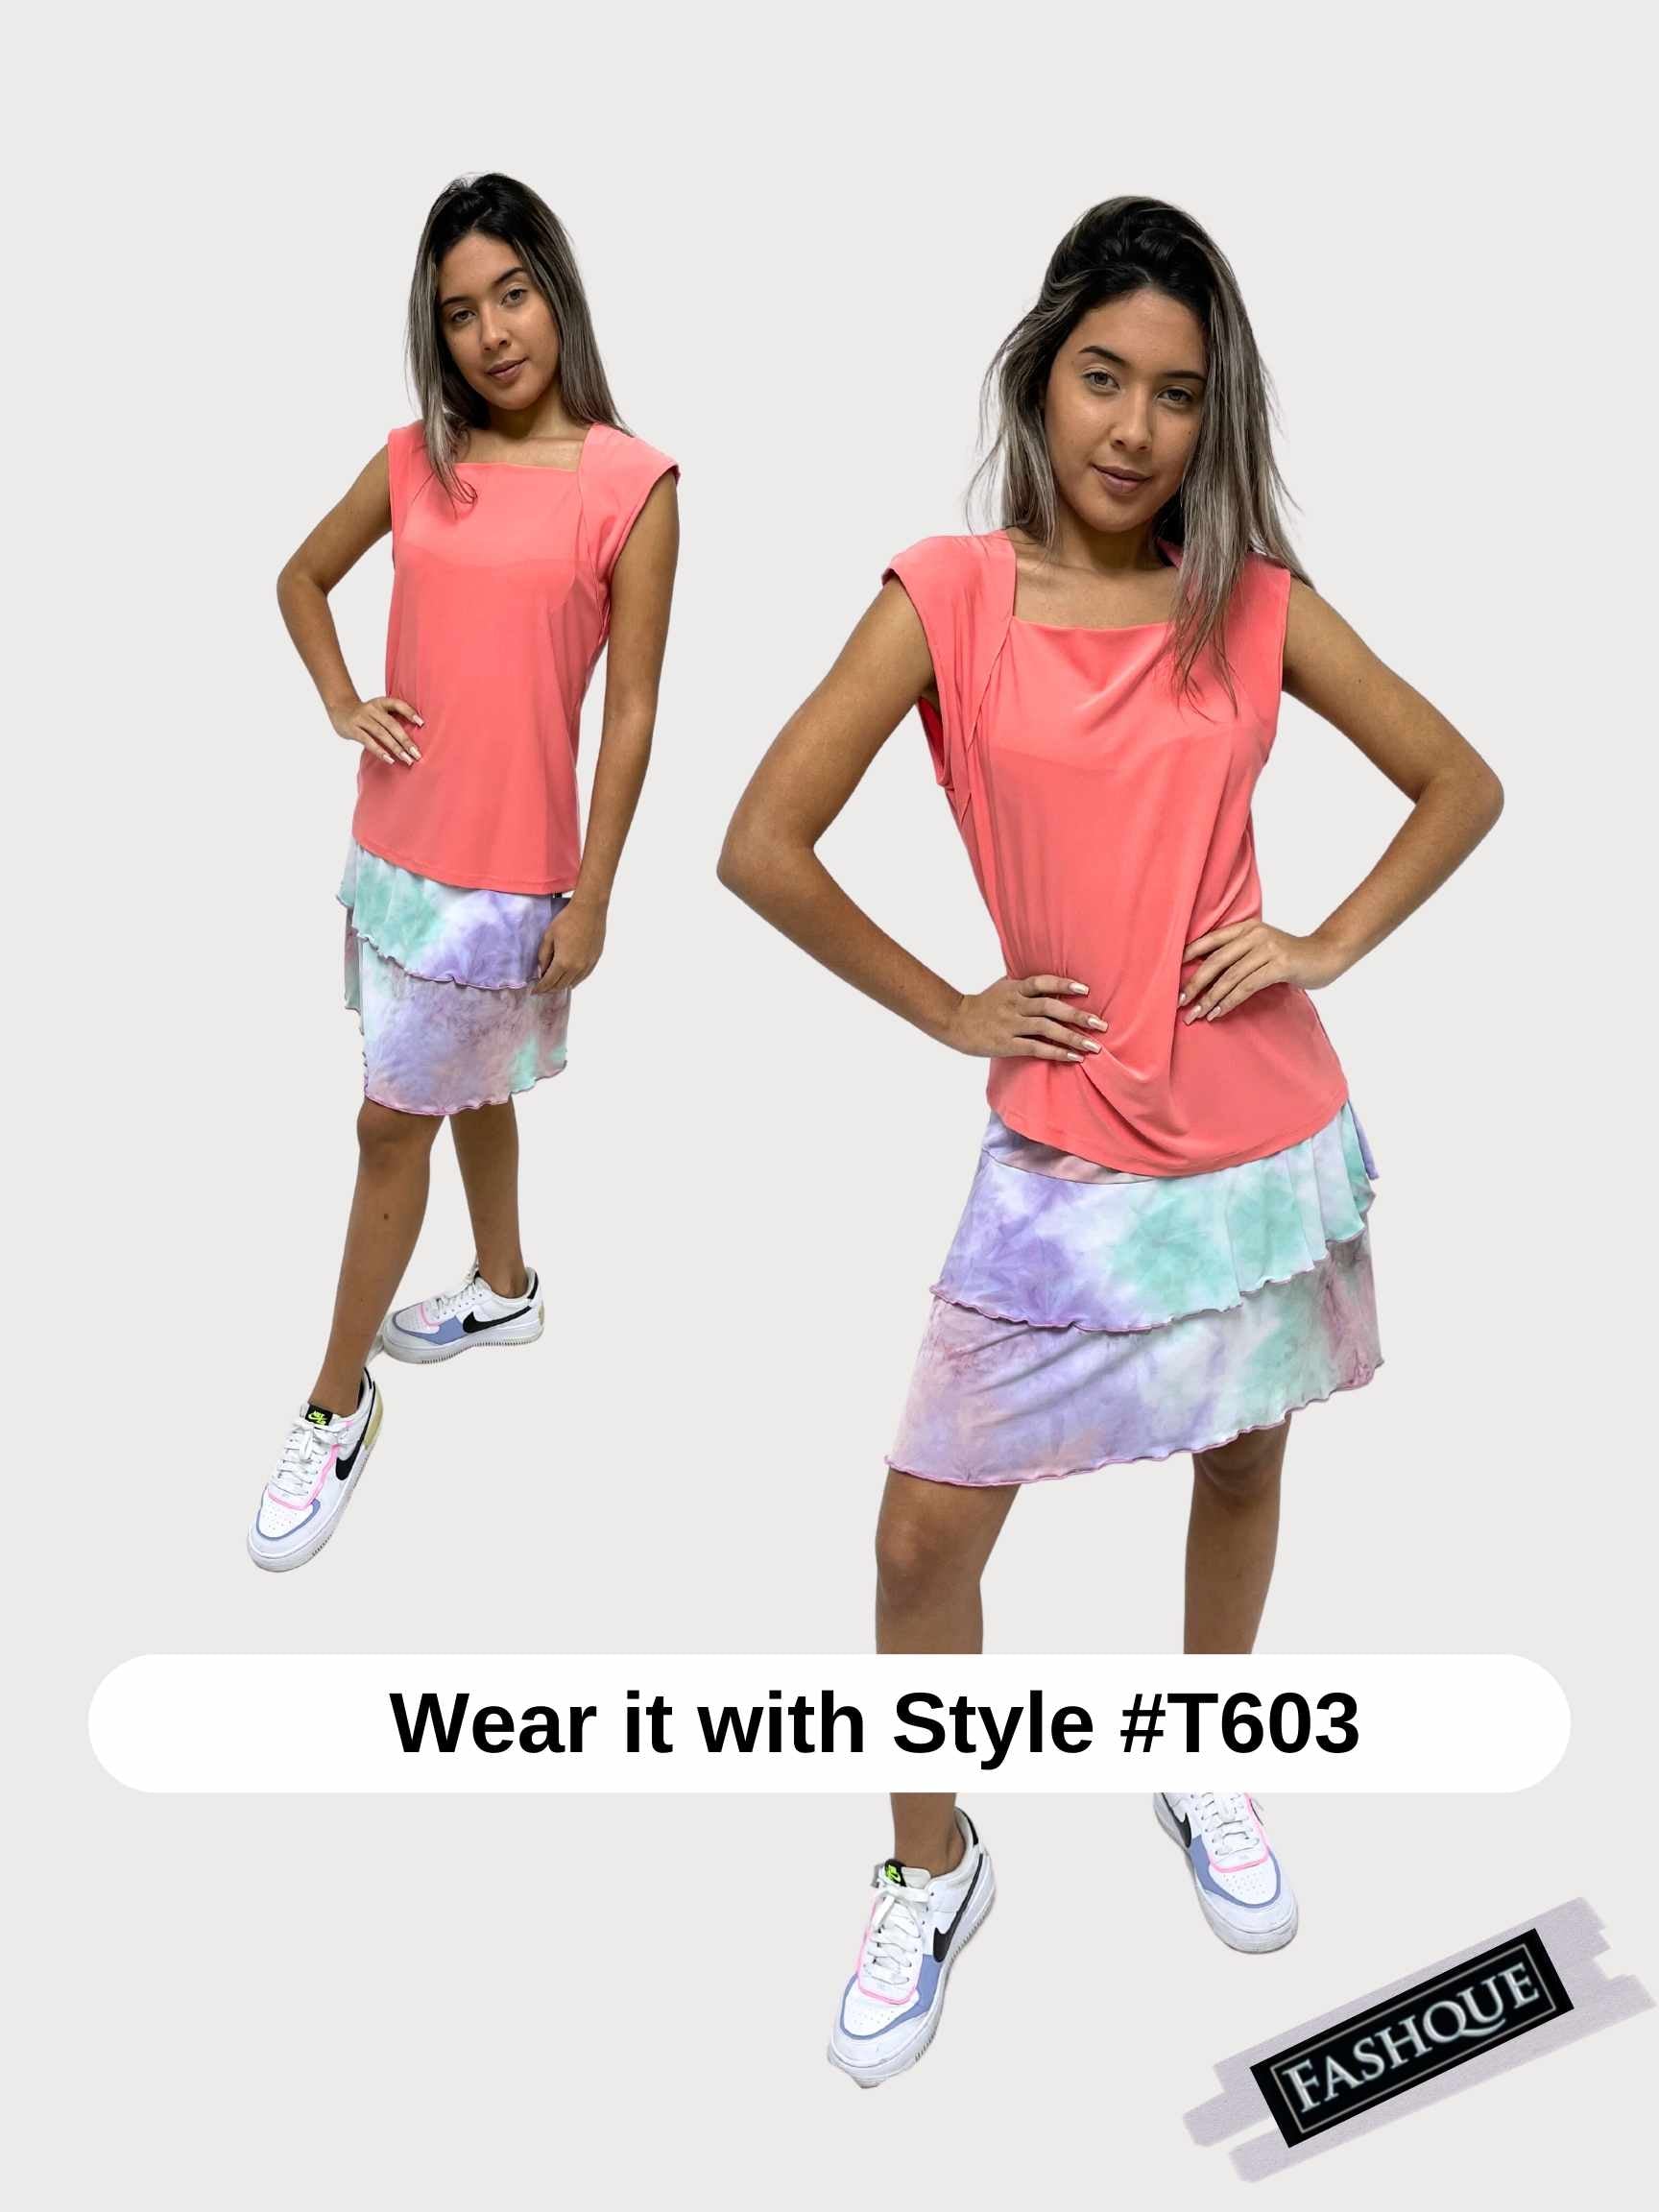 3 Tier PRINTED SKORT with the Ruffle in the center - SH001